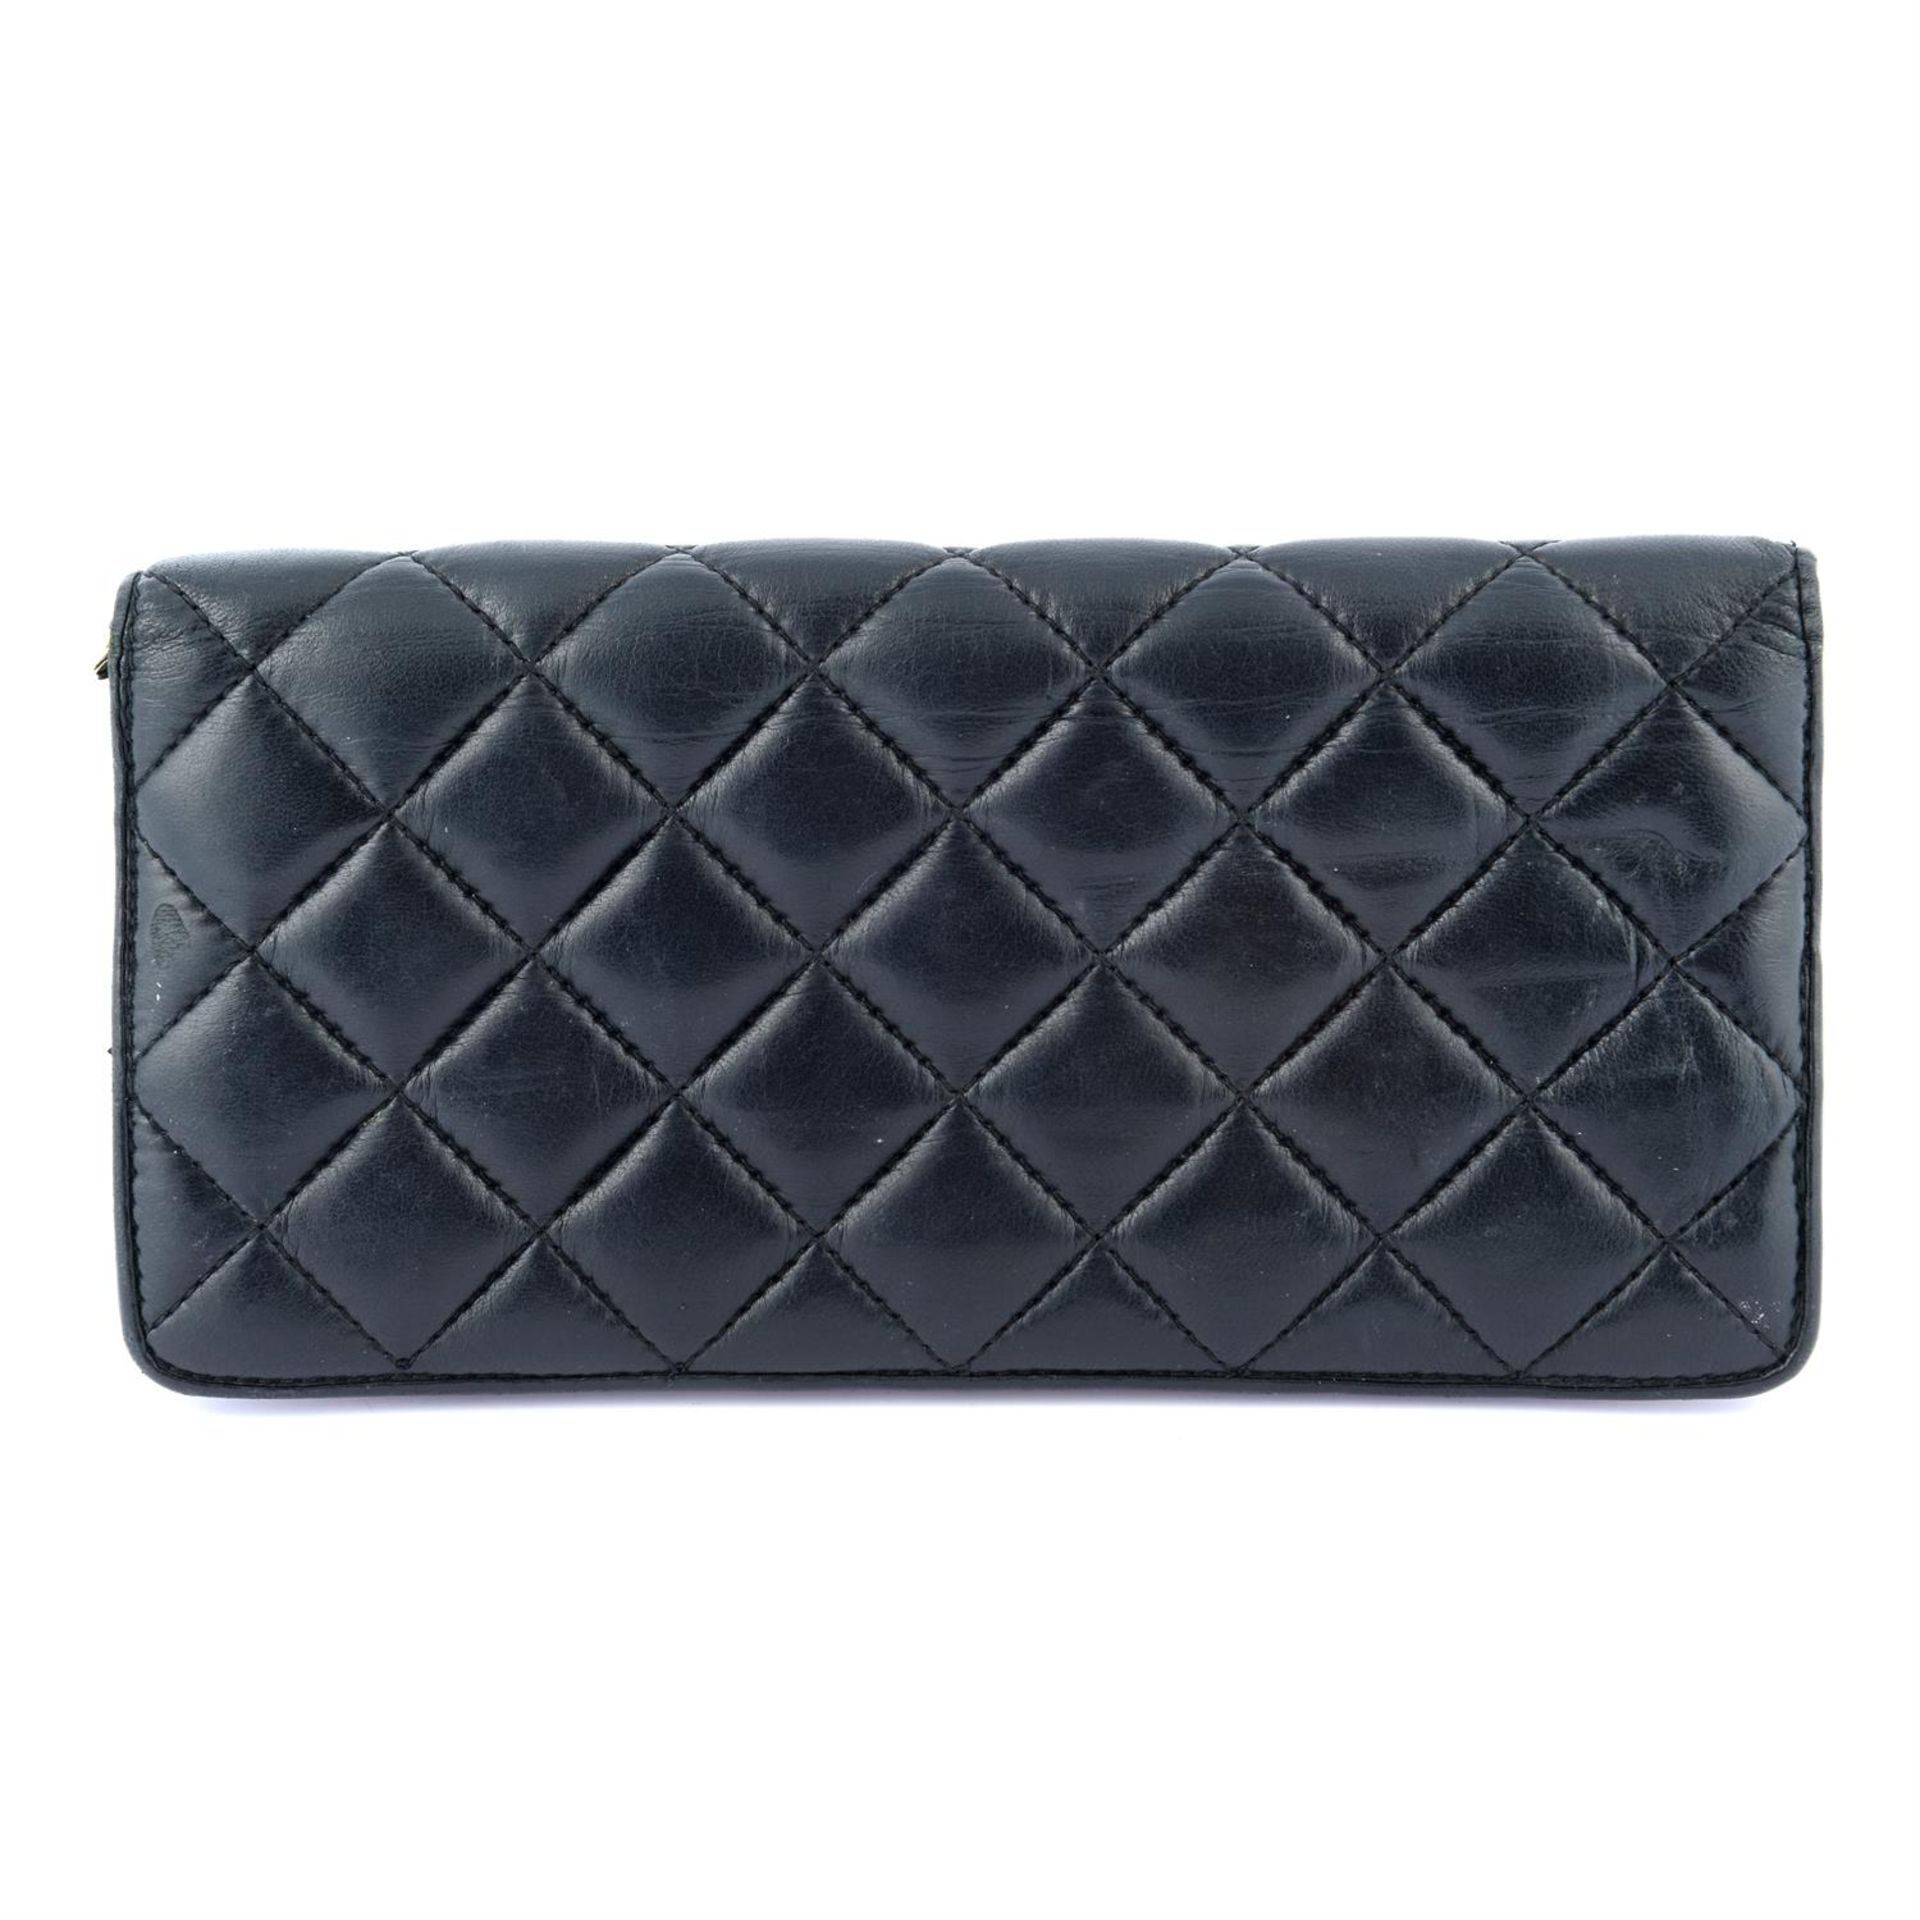 CAROLINA HERRERA - a black quilted leather wallet. - Image 2 of 3